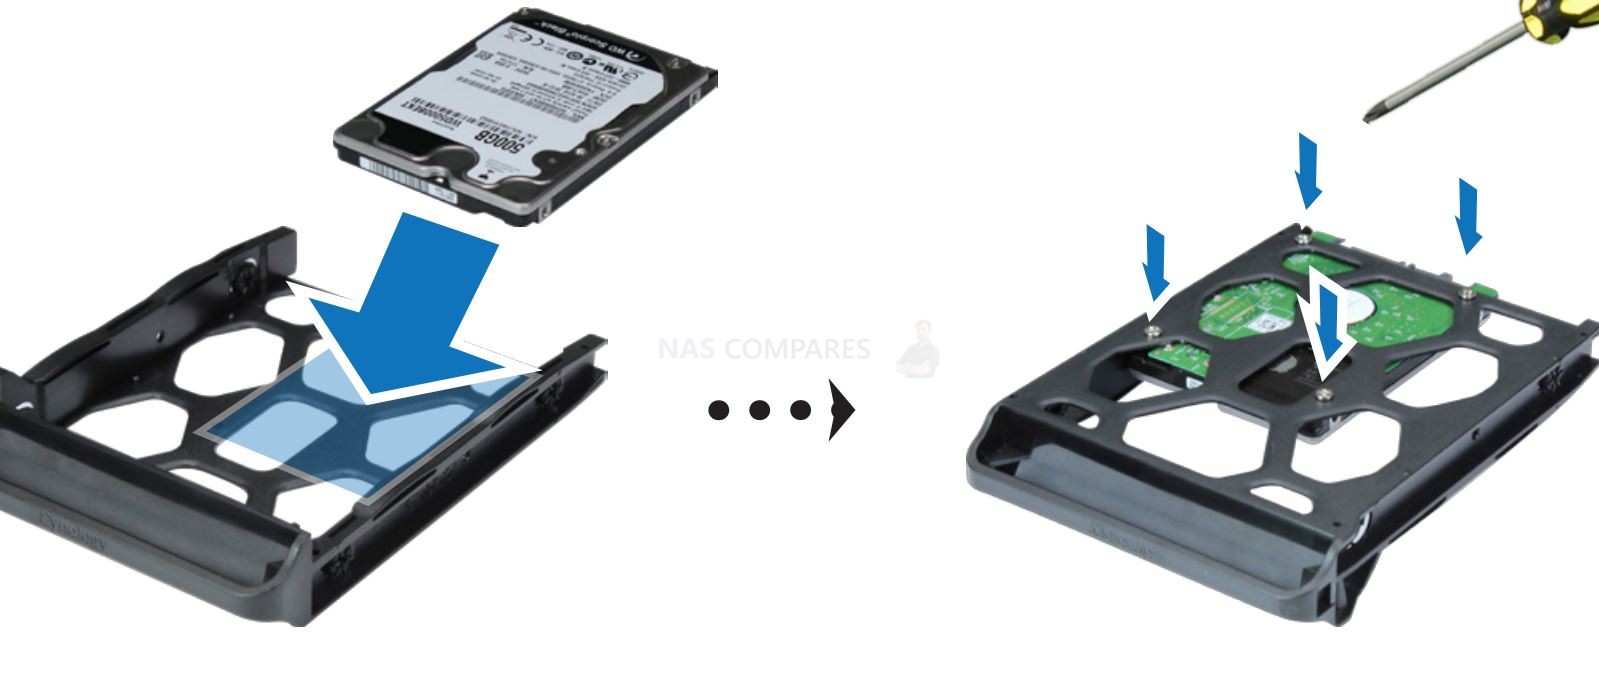 Do I have to buy the to 3,5” adapter for SSD? – NAS Compares